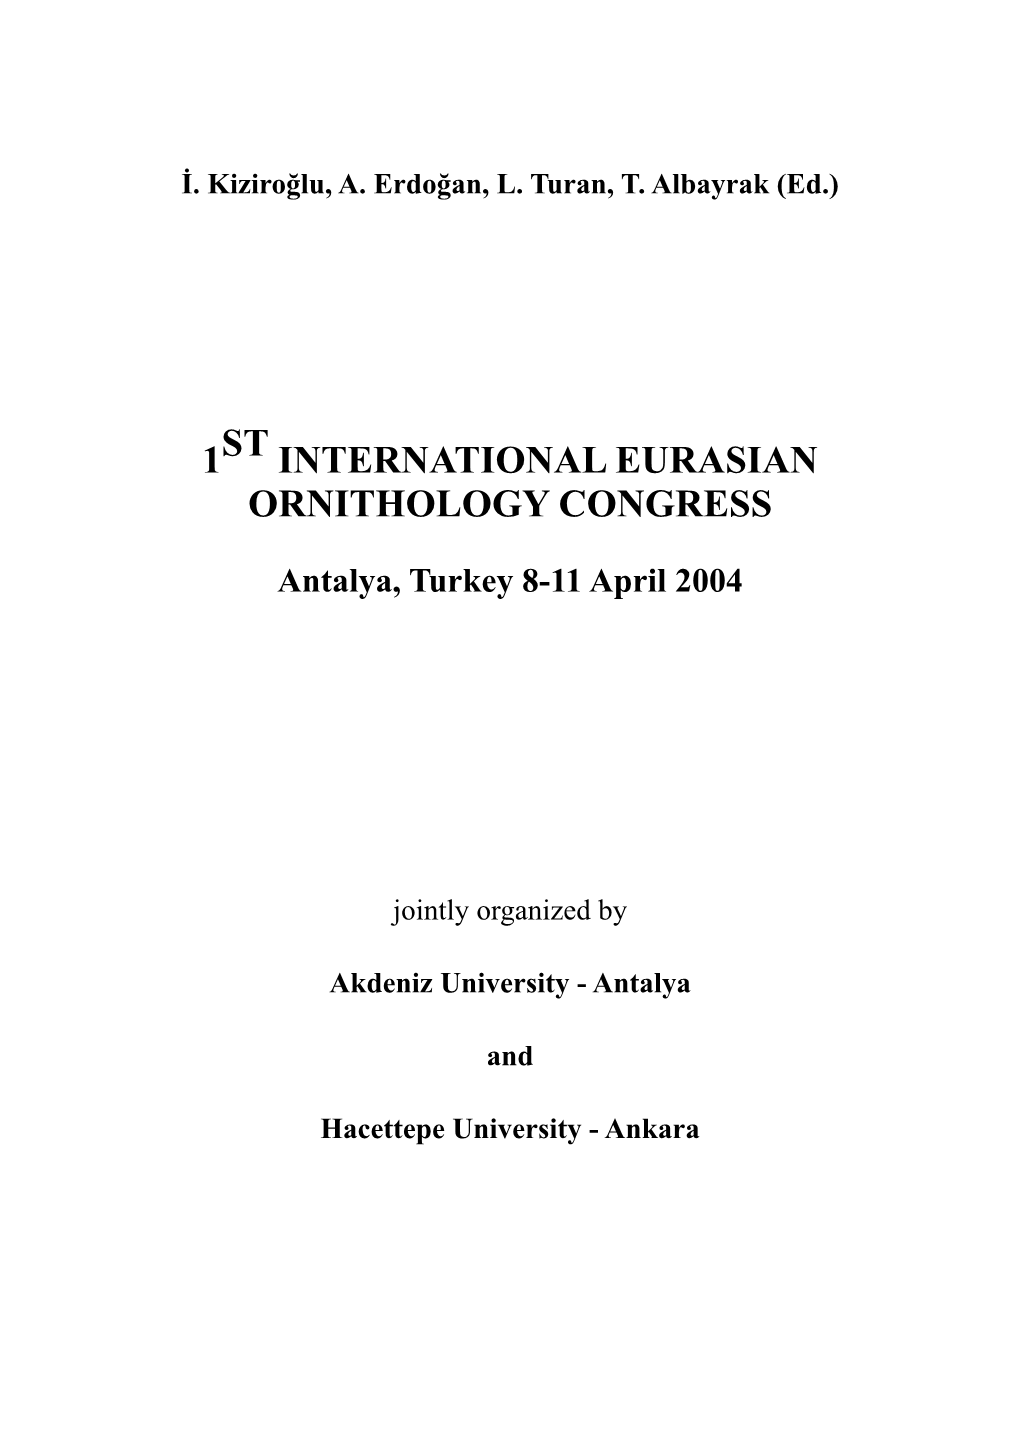 2004 1 IEOC Abstract Book A5